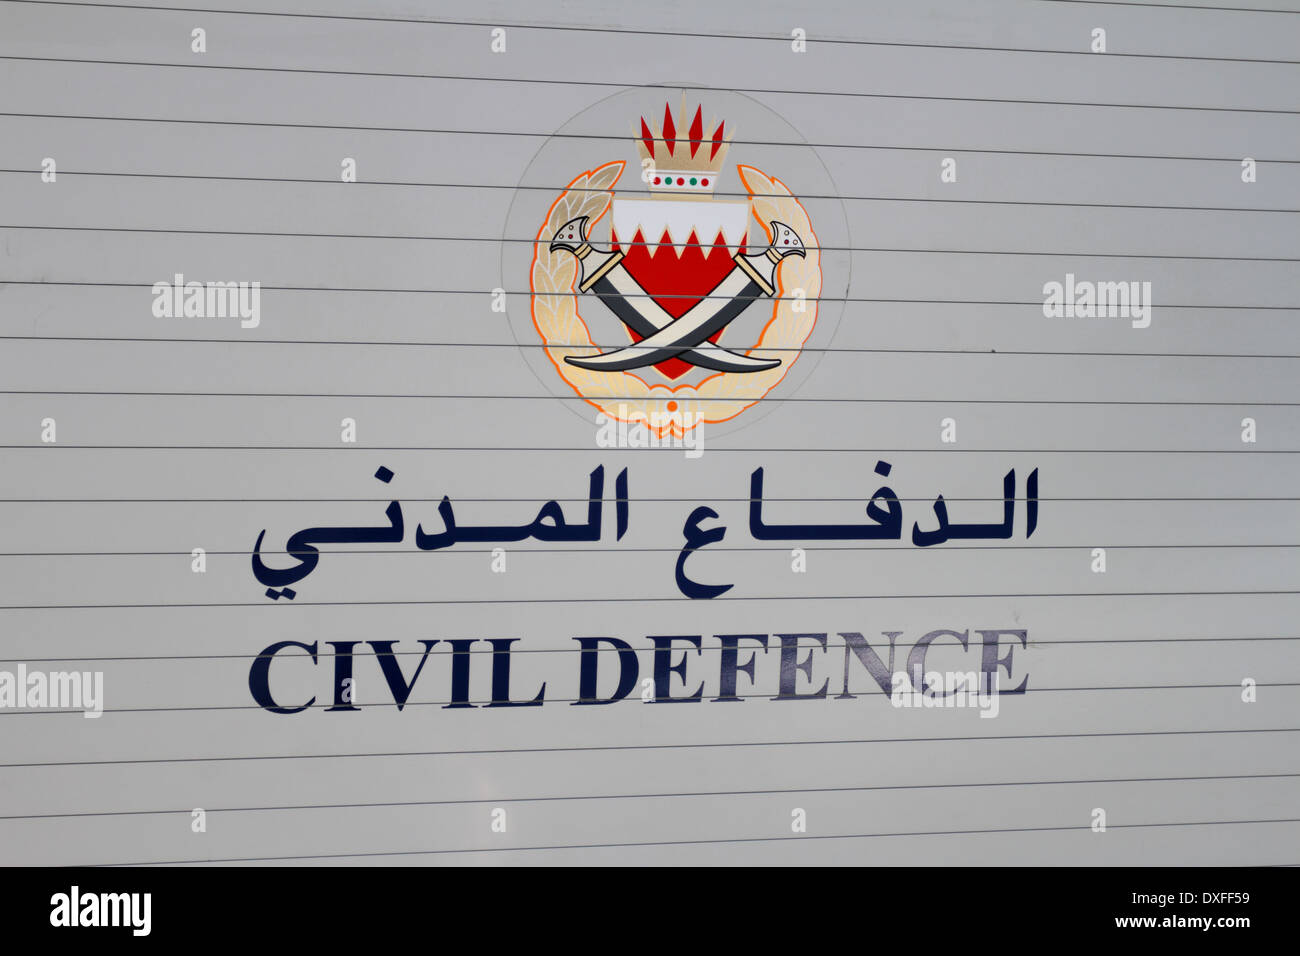 Logo of the Civil Defence on the side of an ambulance, Kingdom of Bahrain Stock Photo